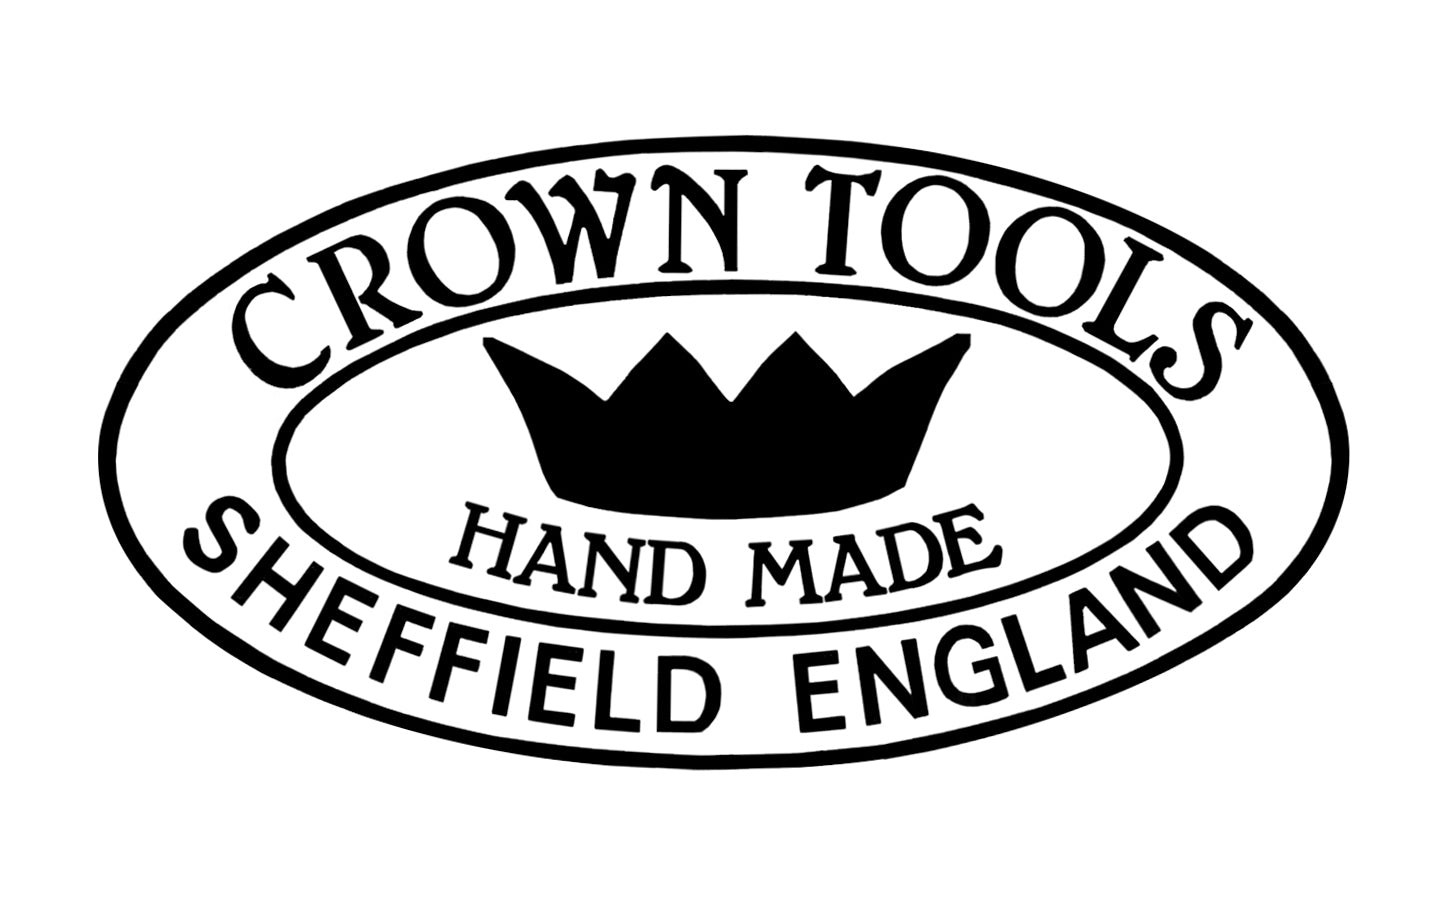 Crown Tools 2" Filing Knife with a flexible spring-tempered blade. High quality putty knife for filing holes, cracks, etc. Walnut wood handle. Made in Sheffield, England. Model 312.